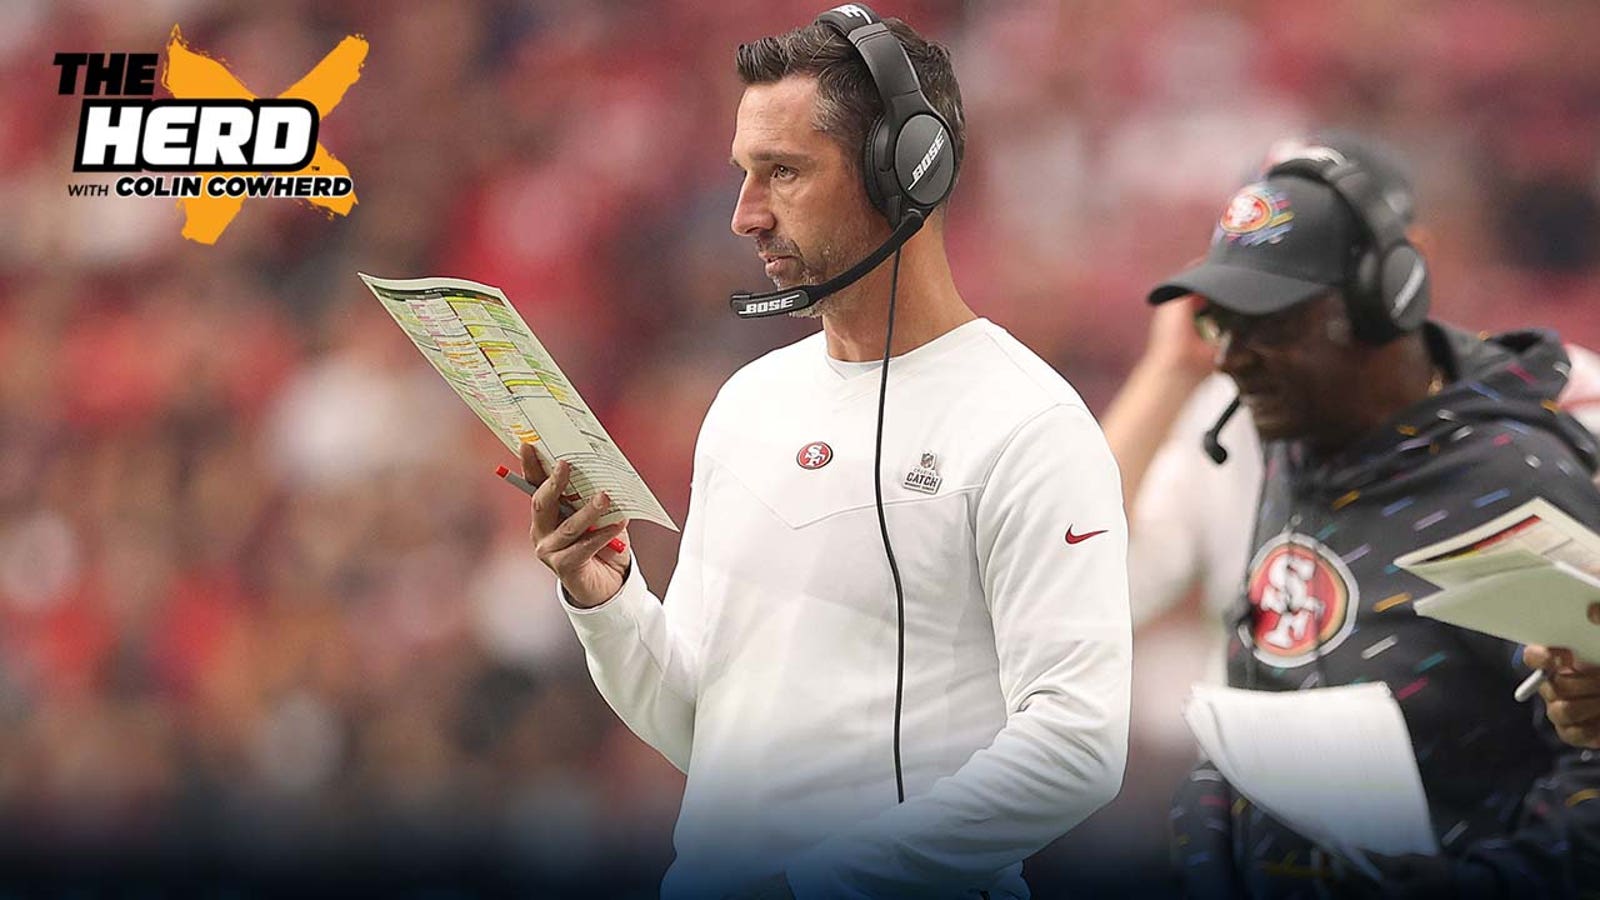 Colin Cowherd: Kyle Shanahan coaches scared, this 49ers franchise is not elite I THE HERD